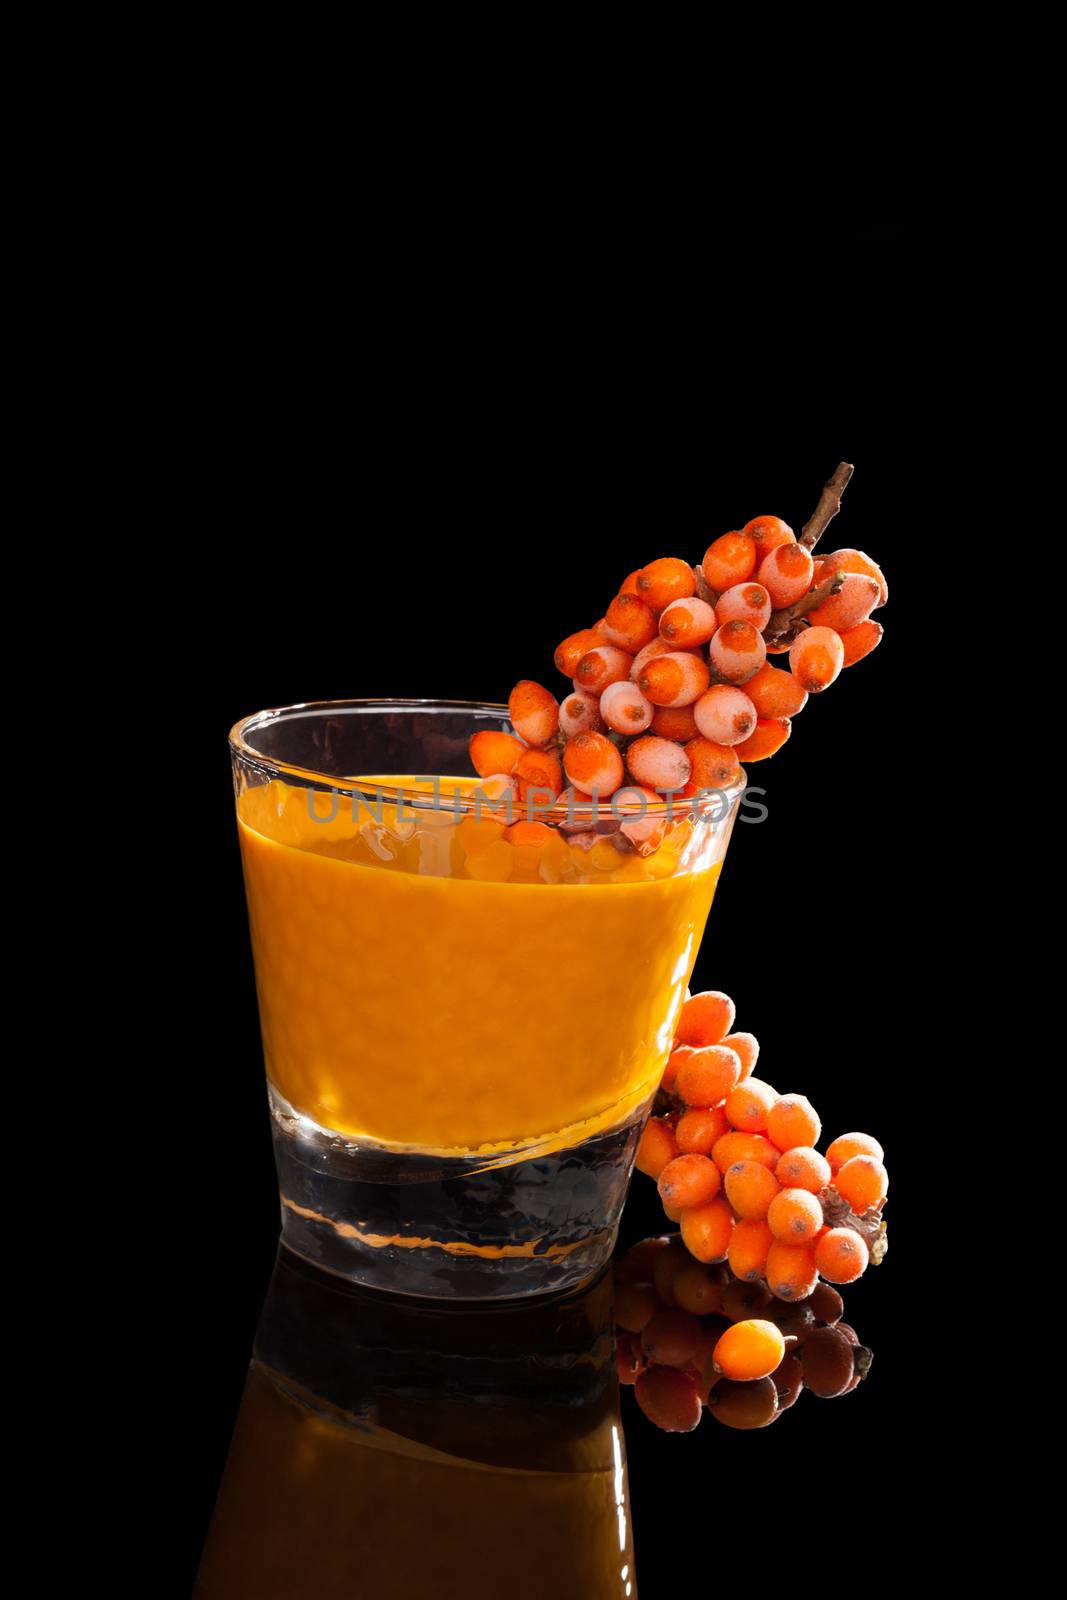 Sea buckthorn and sea buckthorn juice in glass isolated on black background. Healthy living, immune system booth.